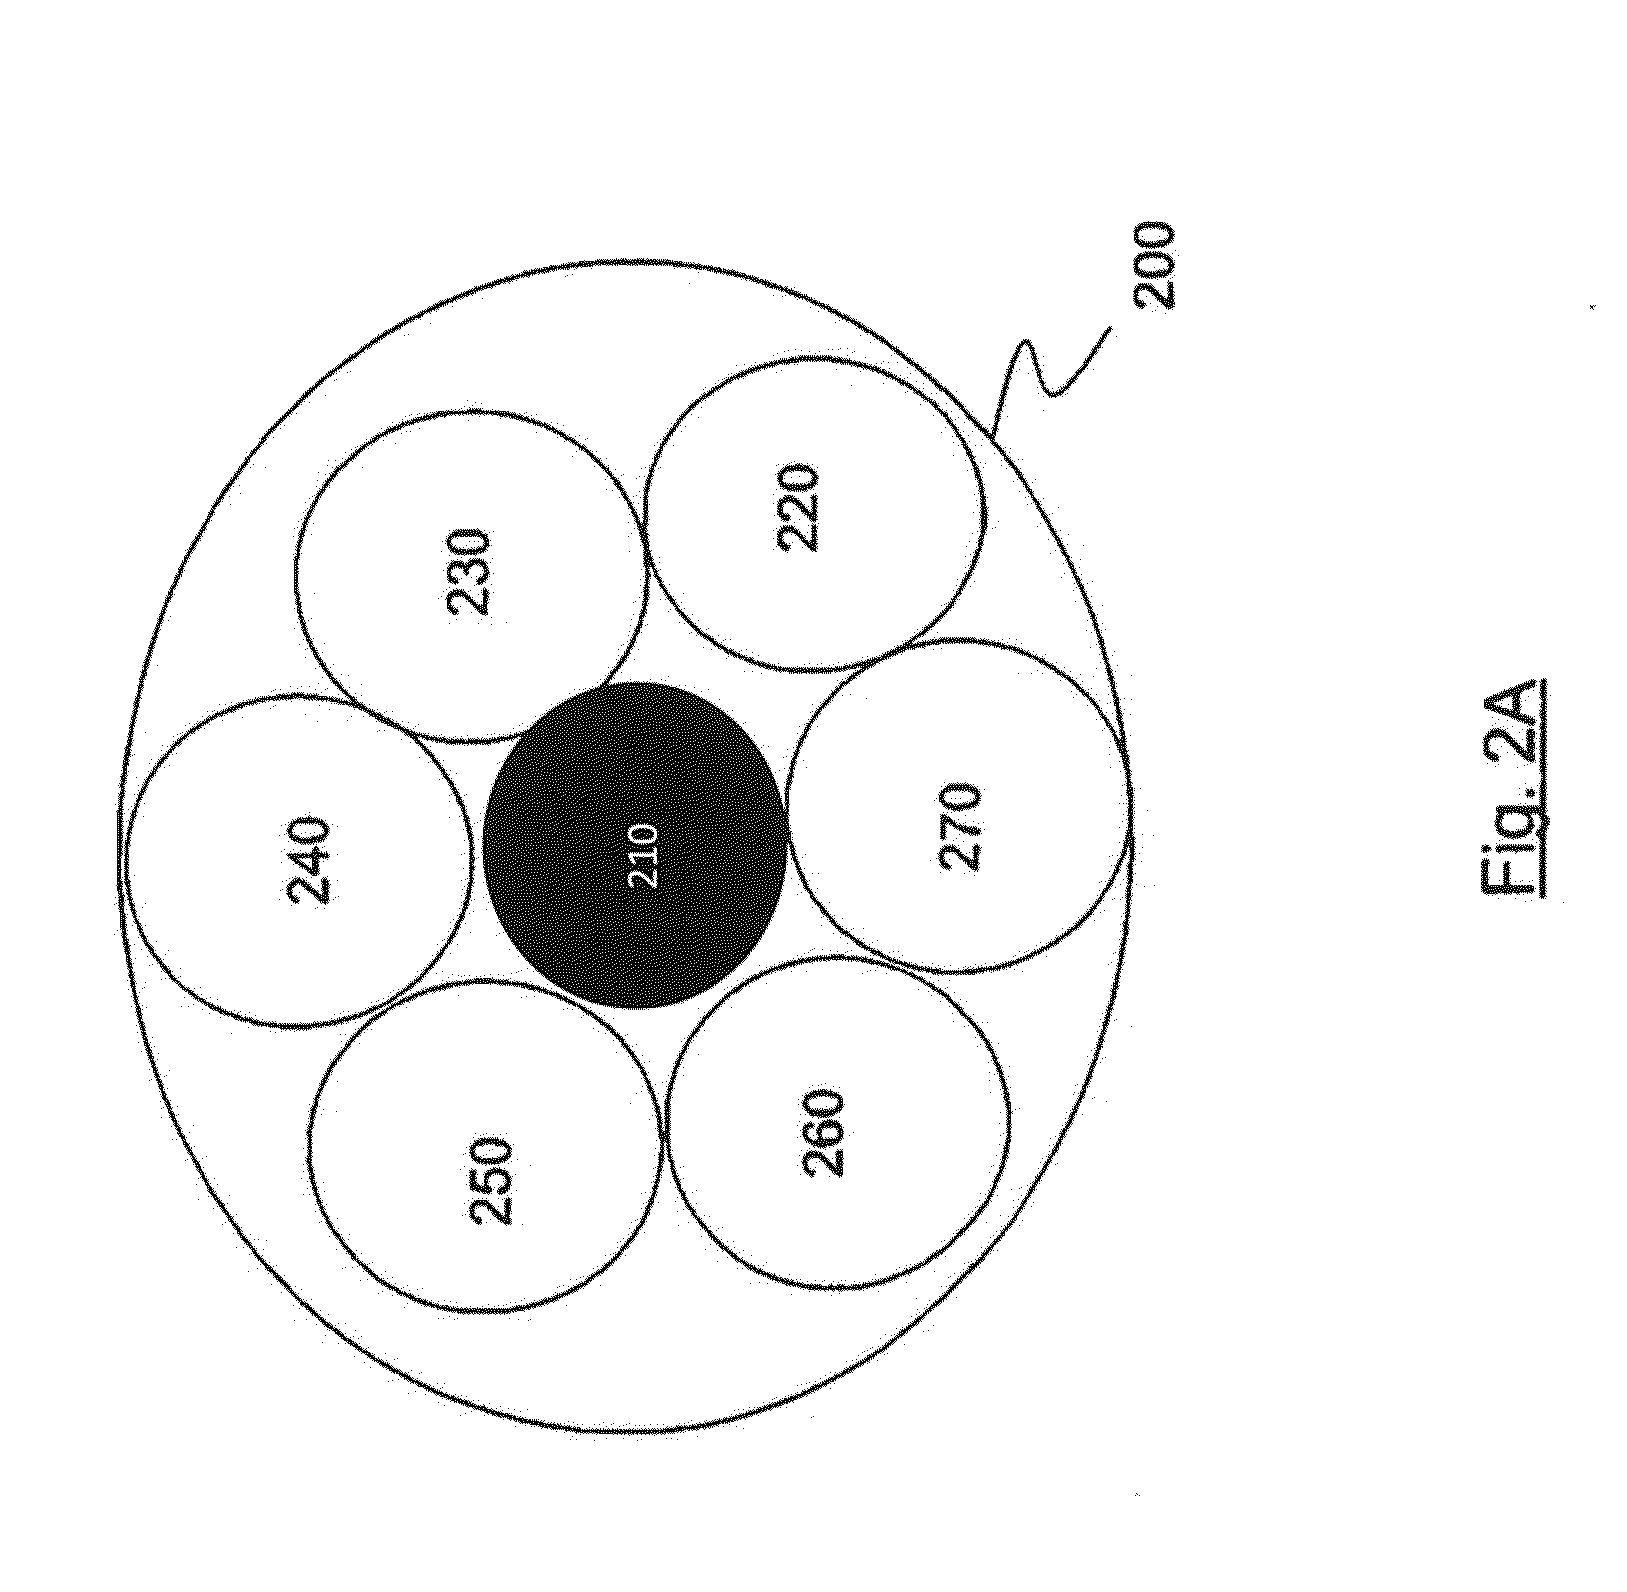 System and Method for Combined Raman and LIBS Detection with Targeting